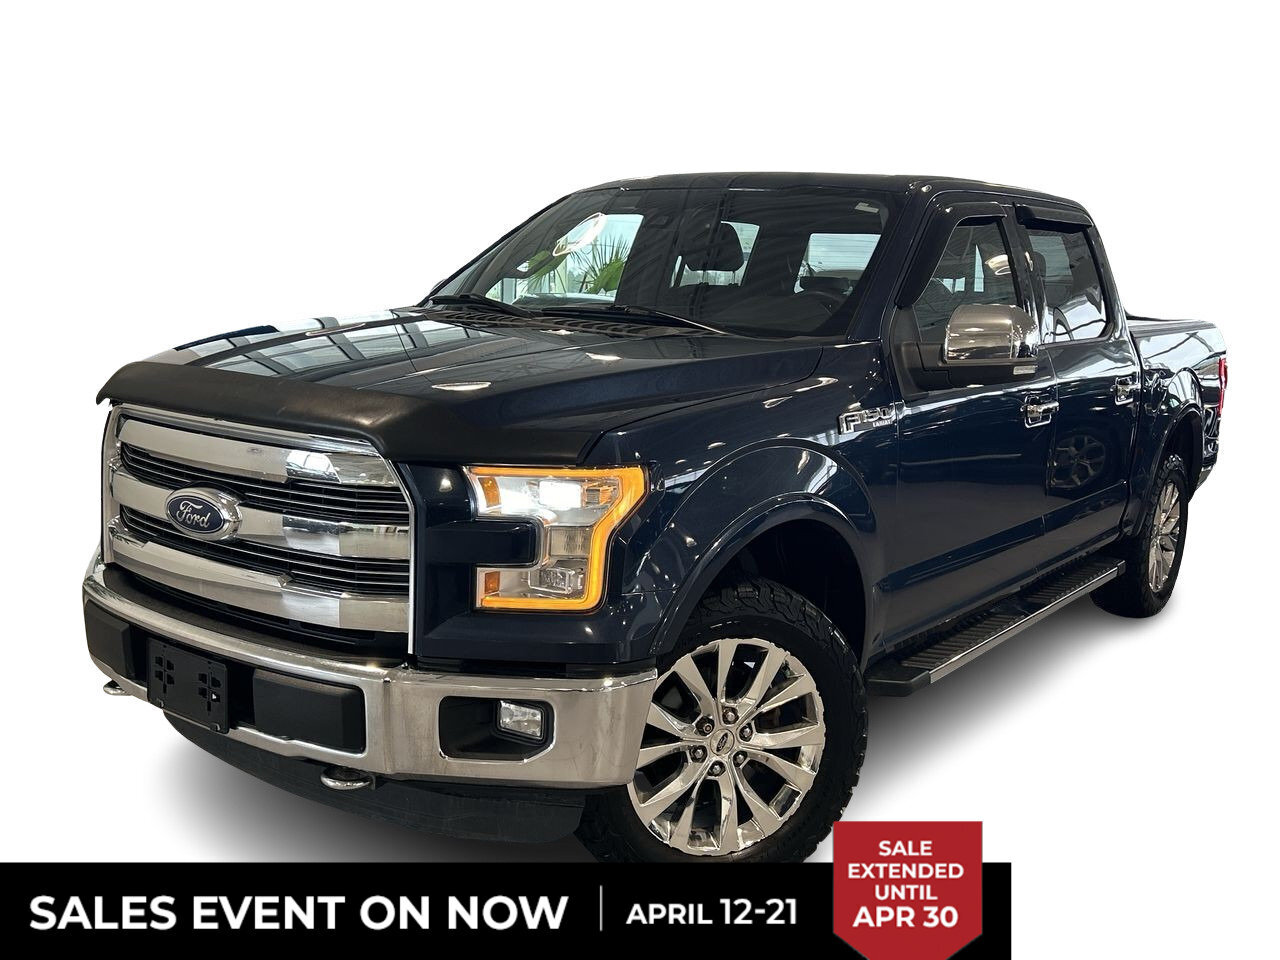 2016 Ford F-150 Supercrew Lariat Equipment Group 502A | Trailer To